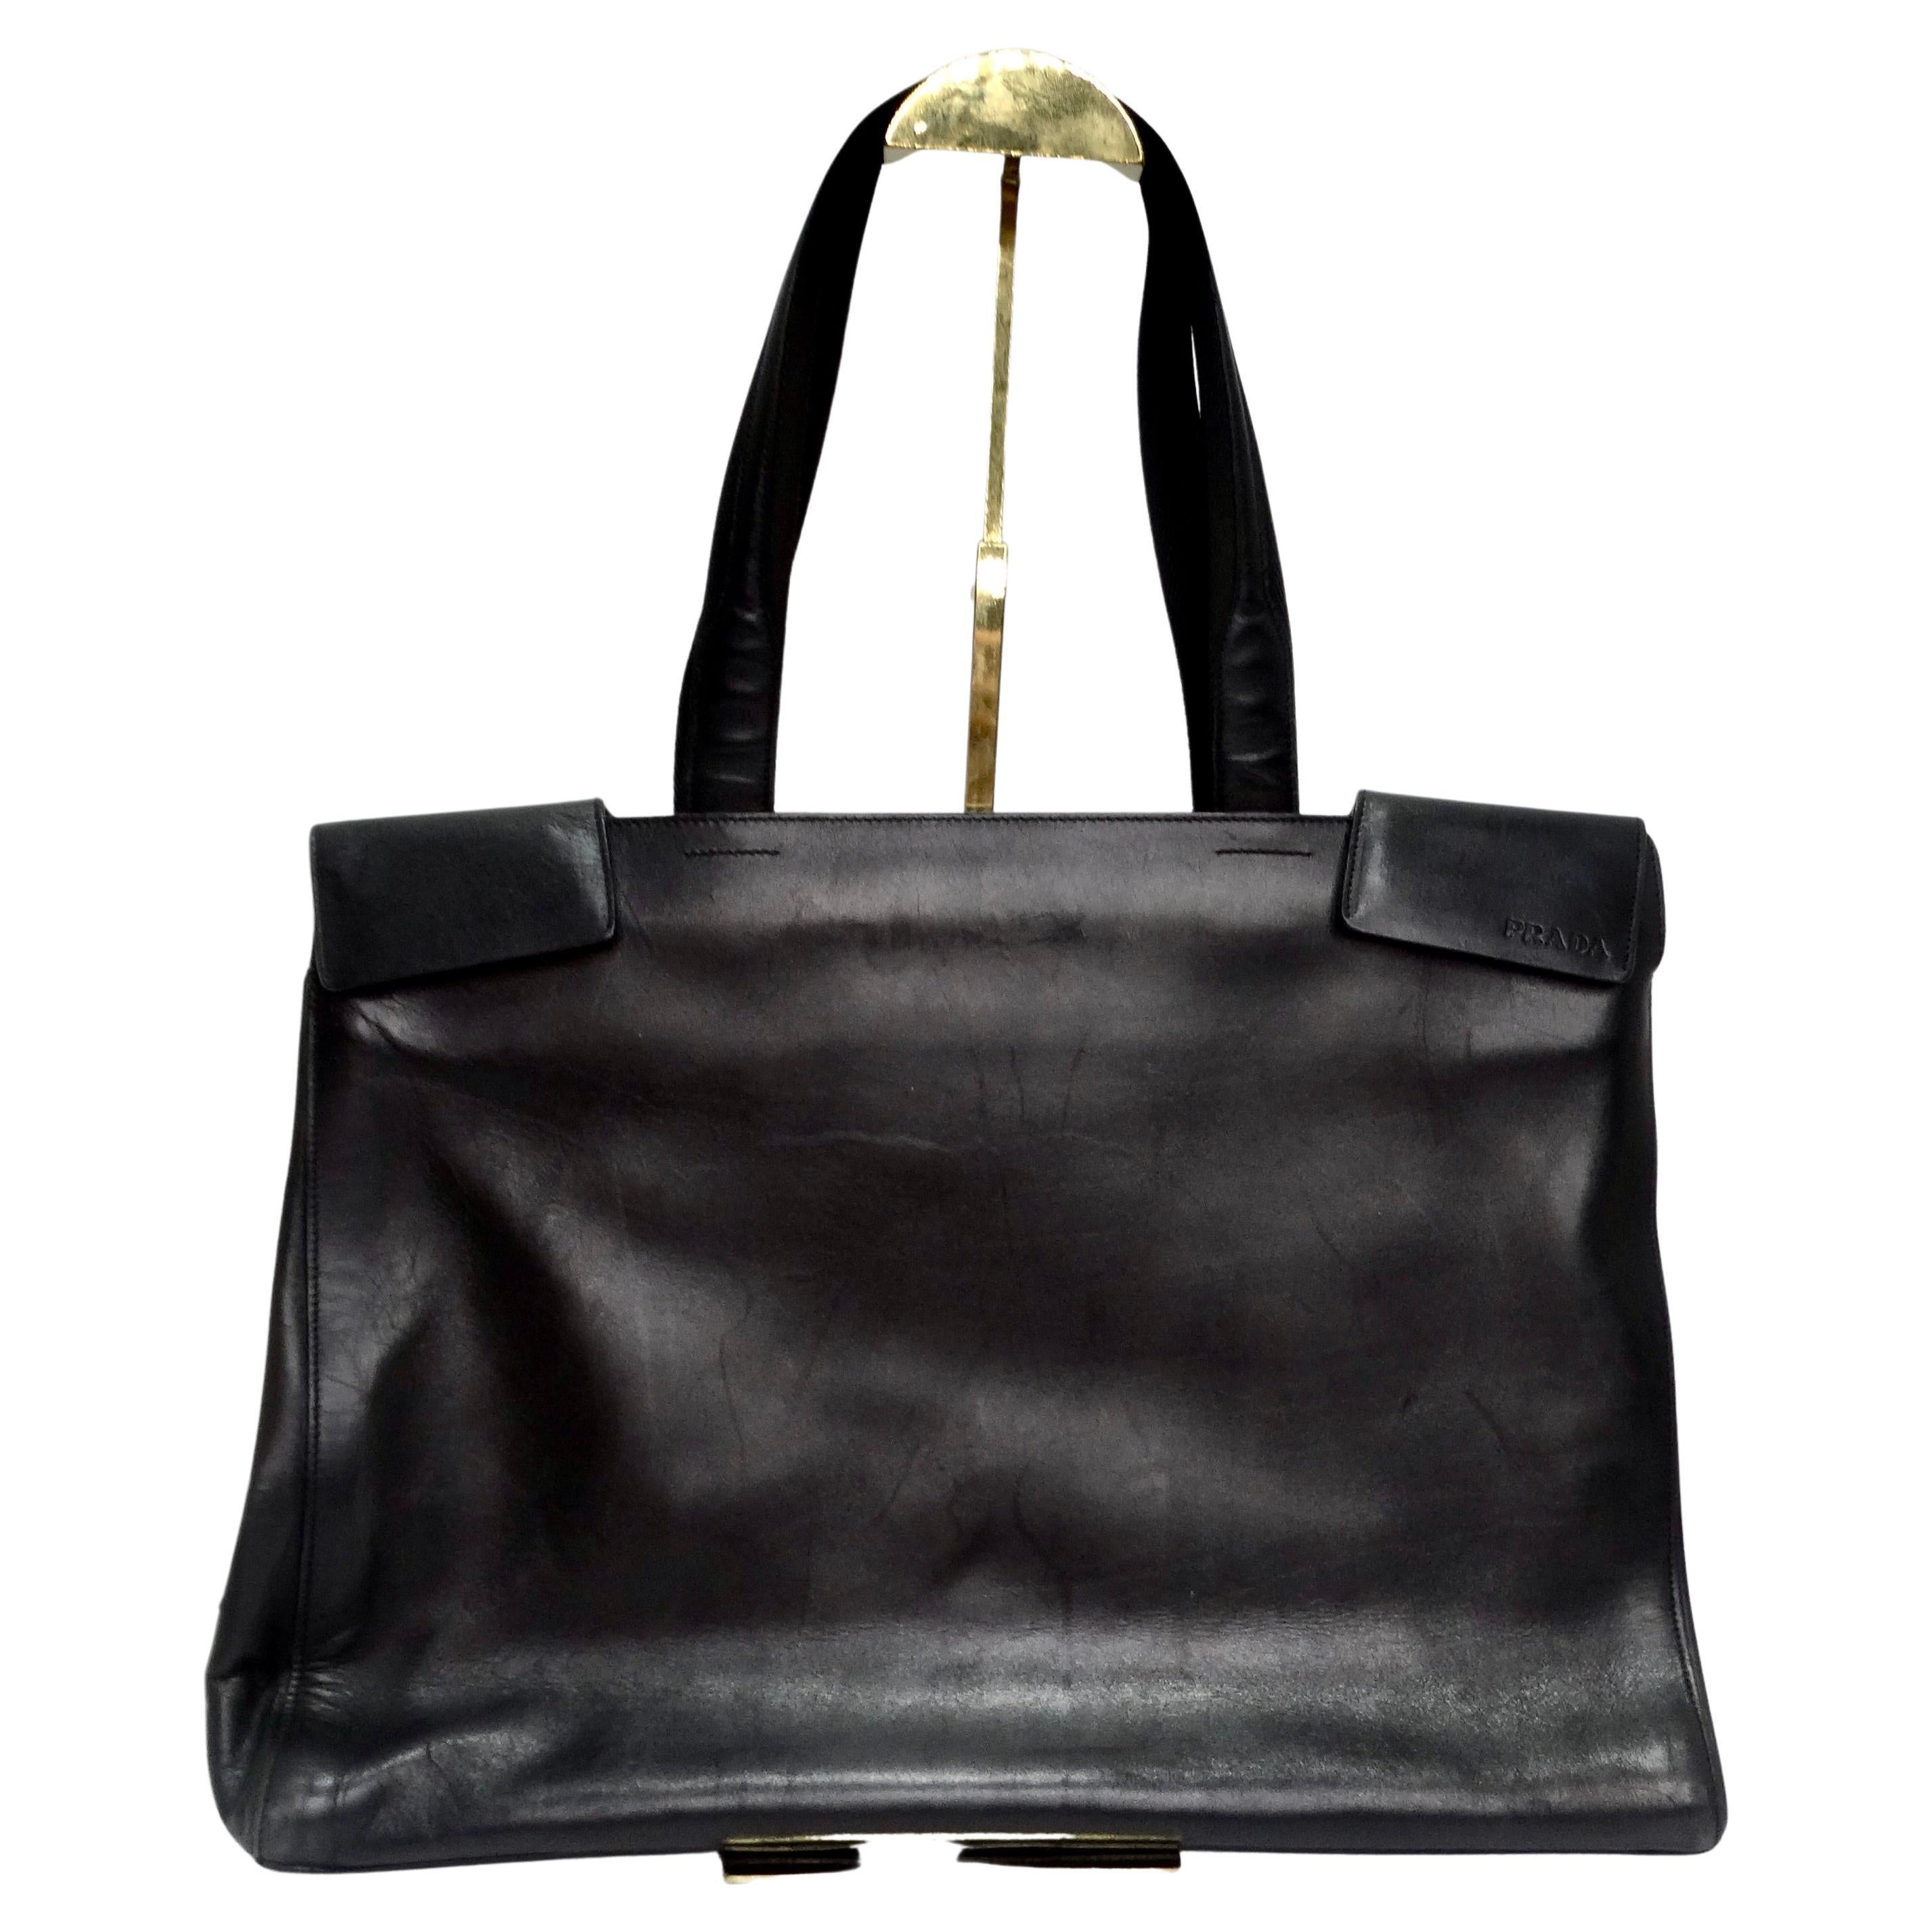 Introducing the Prada Vintage Black Leather Tote Bag: Your Timeless Travel and Work Companion!

Elevate your style with this classic Prada Vintage Black Leather Tote Bag, a true icon of luxury and sophistication. Crafted with precision and attention